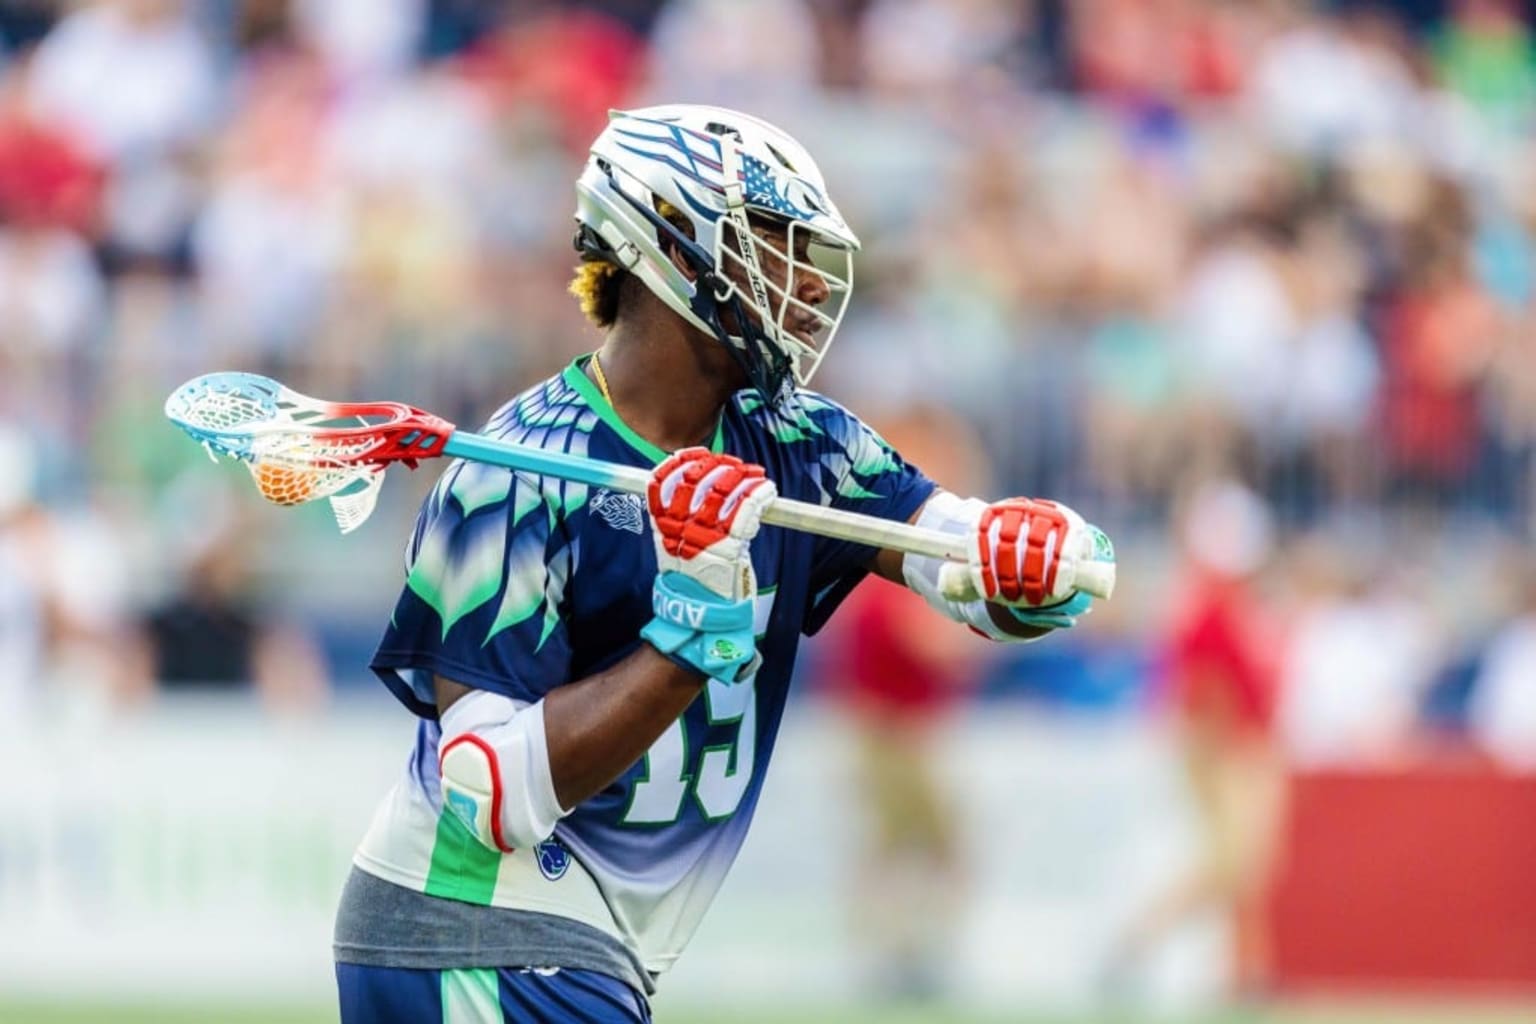 MLL Announces Sandy Brown as New Commissioner